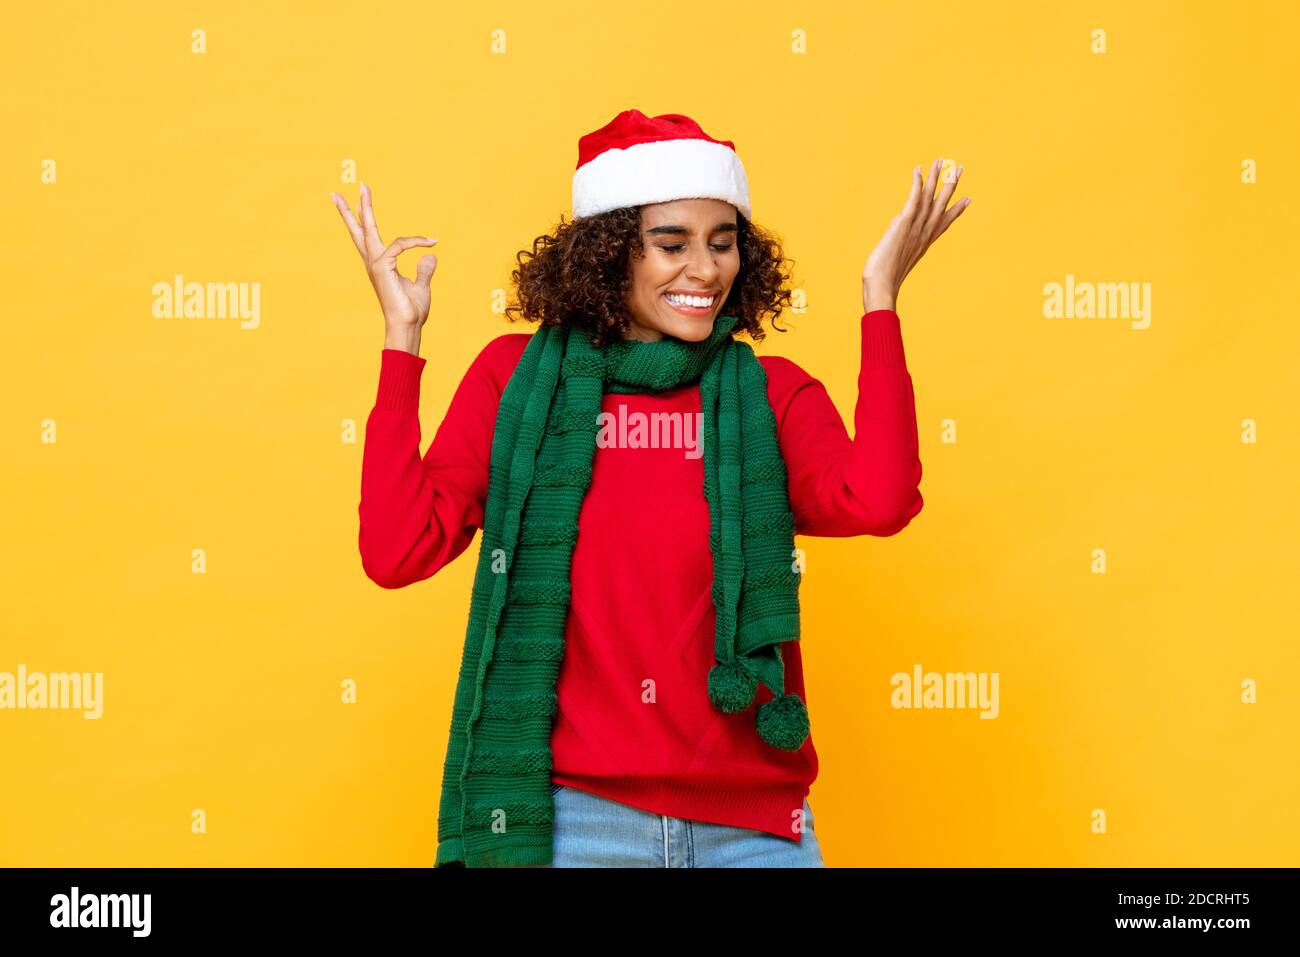 Surprised happy woman in Christmas attire smiling and raising hands up in yellow studio isolated background Stock Photo